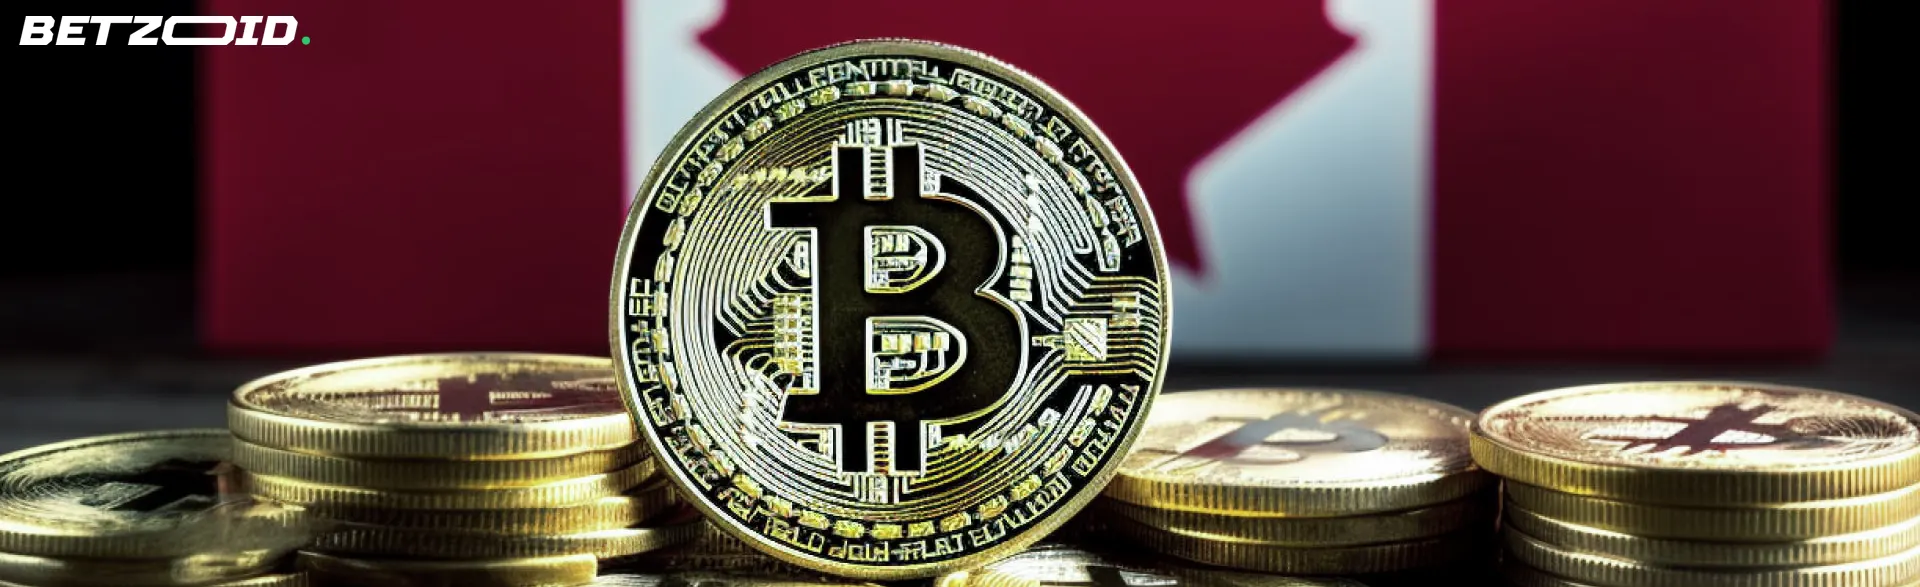 Bitcoin coin in front of a Canadian flag, symbolizing the rise of Bitcoin sportsbooks in Canada.